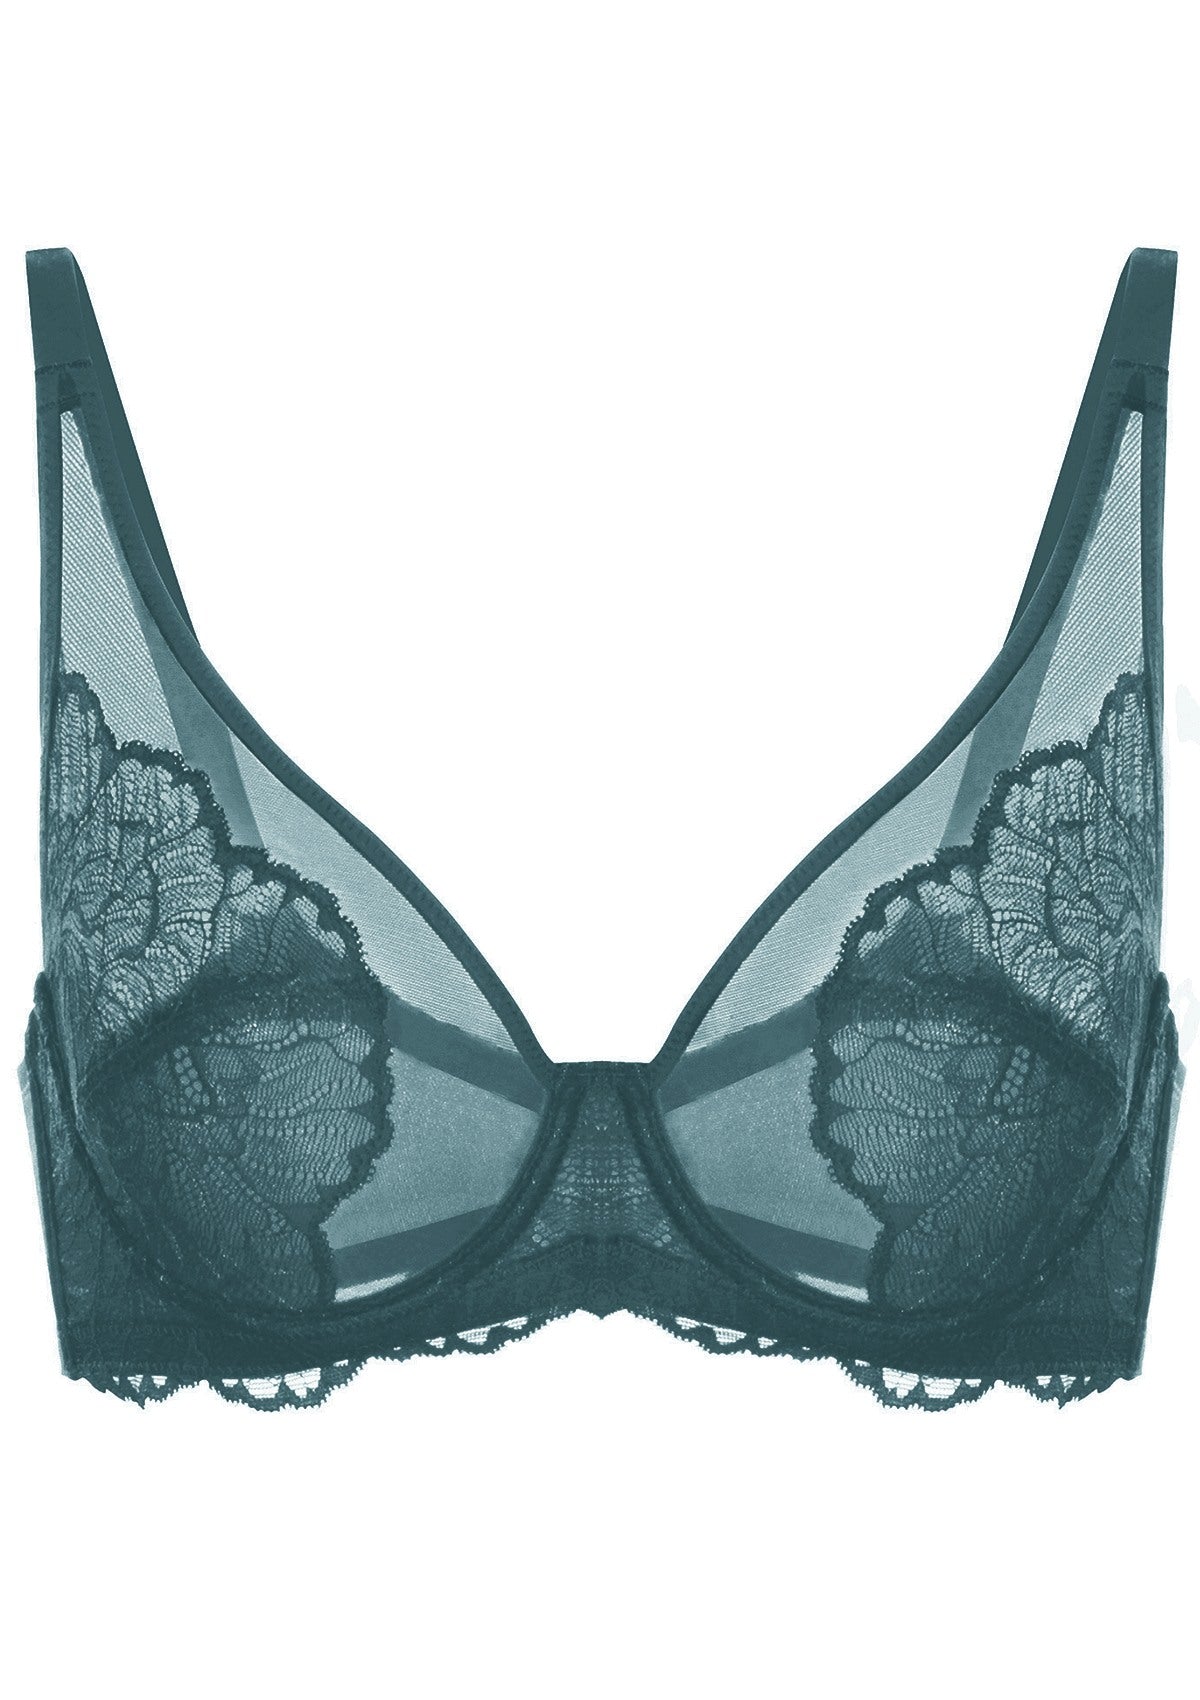 HSIA Blossom Full Figure See-Through Lace Bra For Side And Back Fat - Balsam Blue / 42 / DDD/F